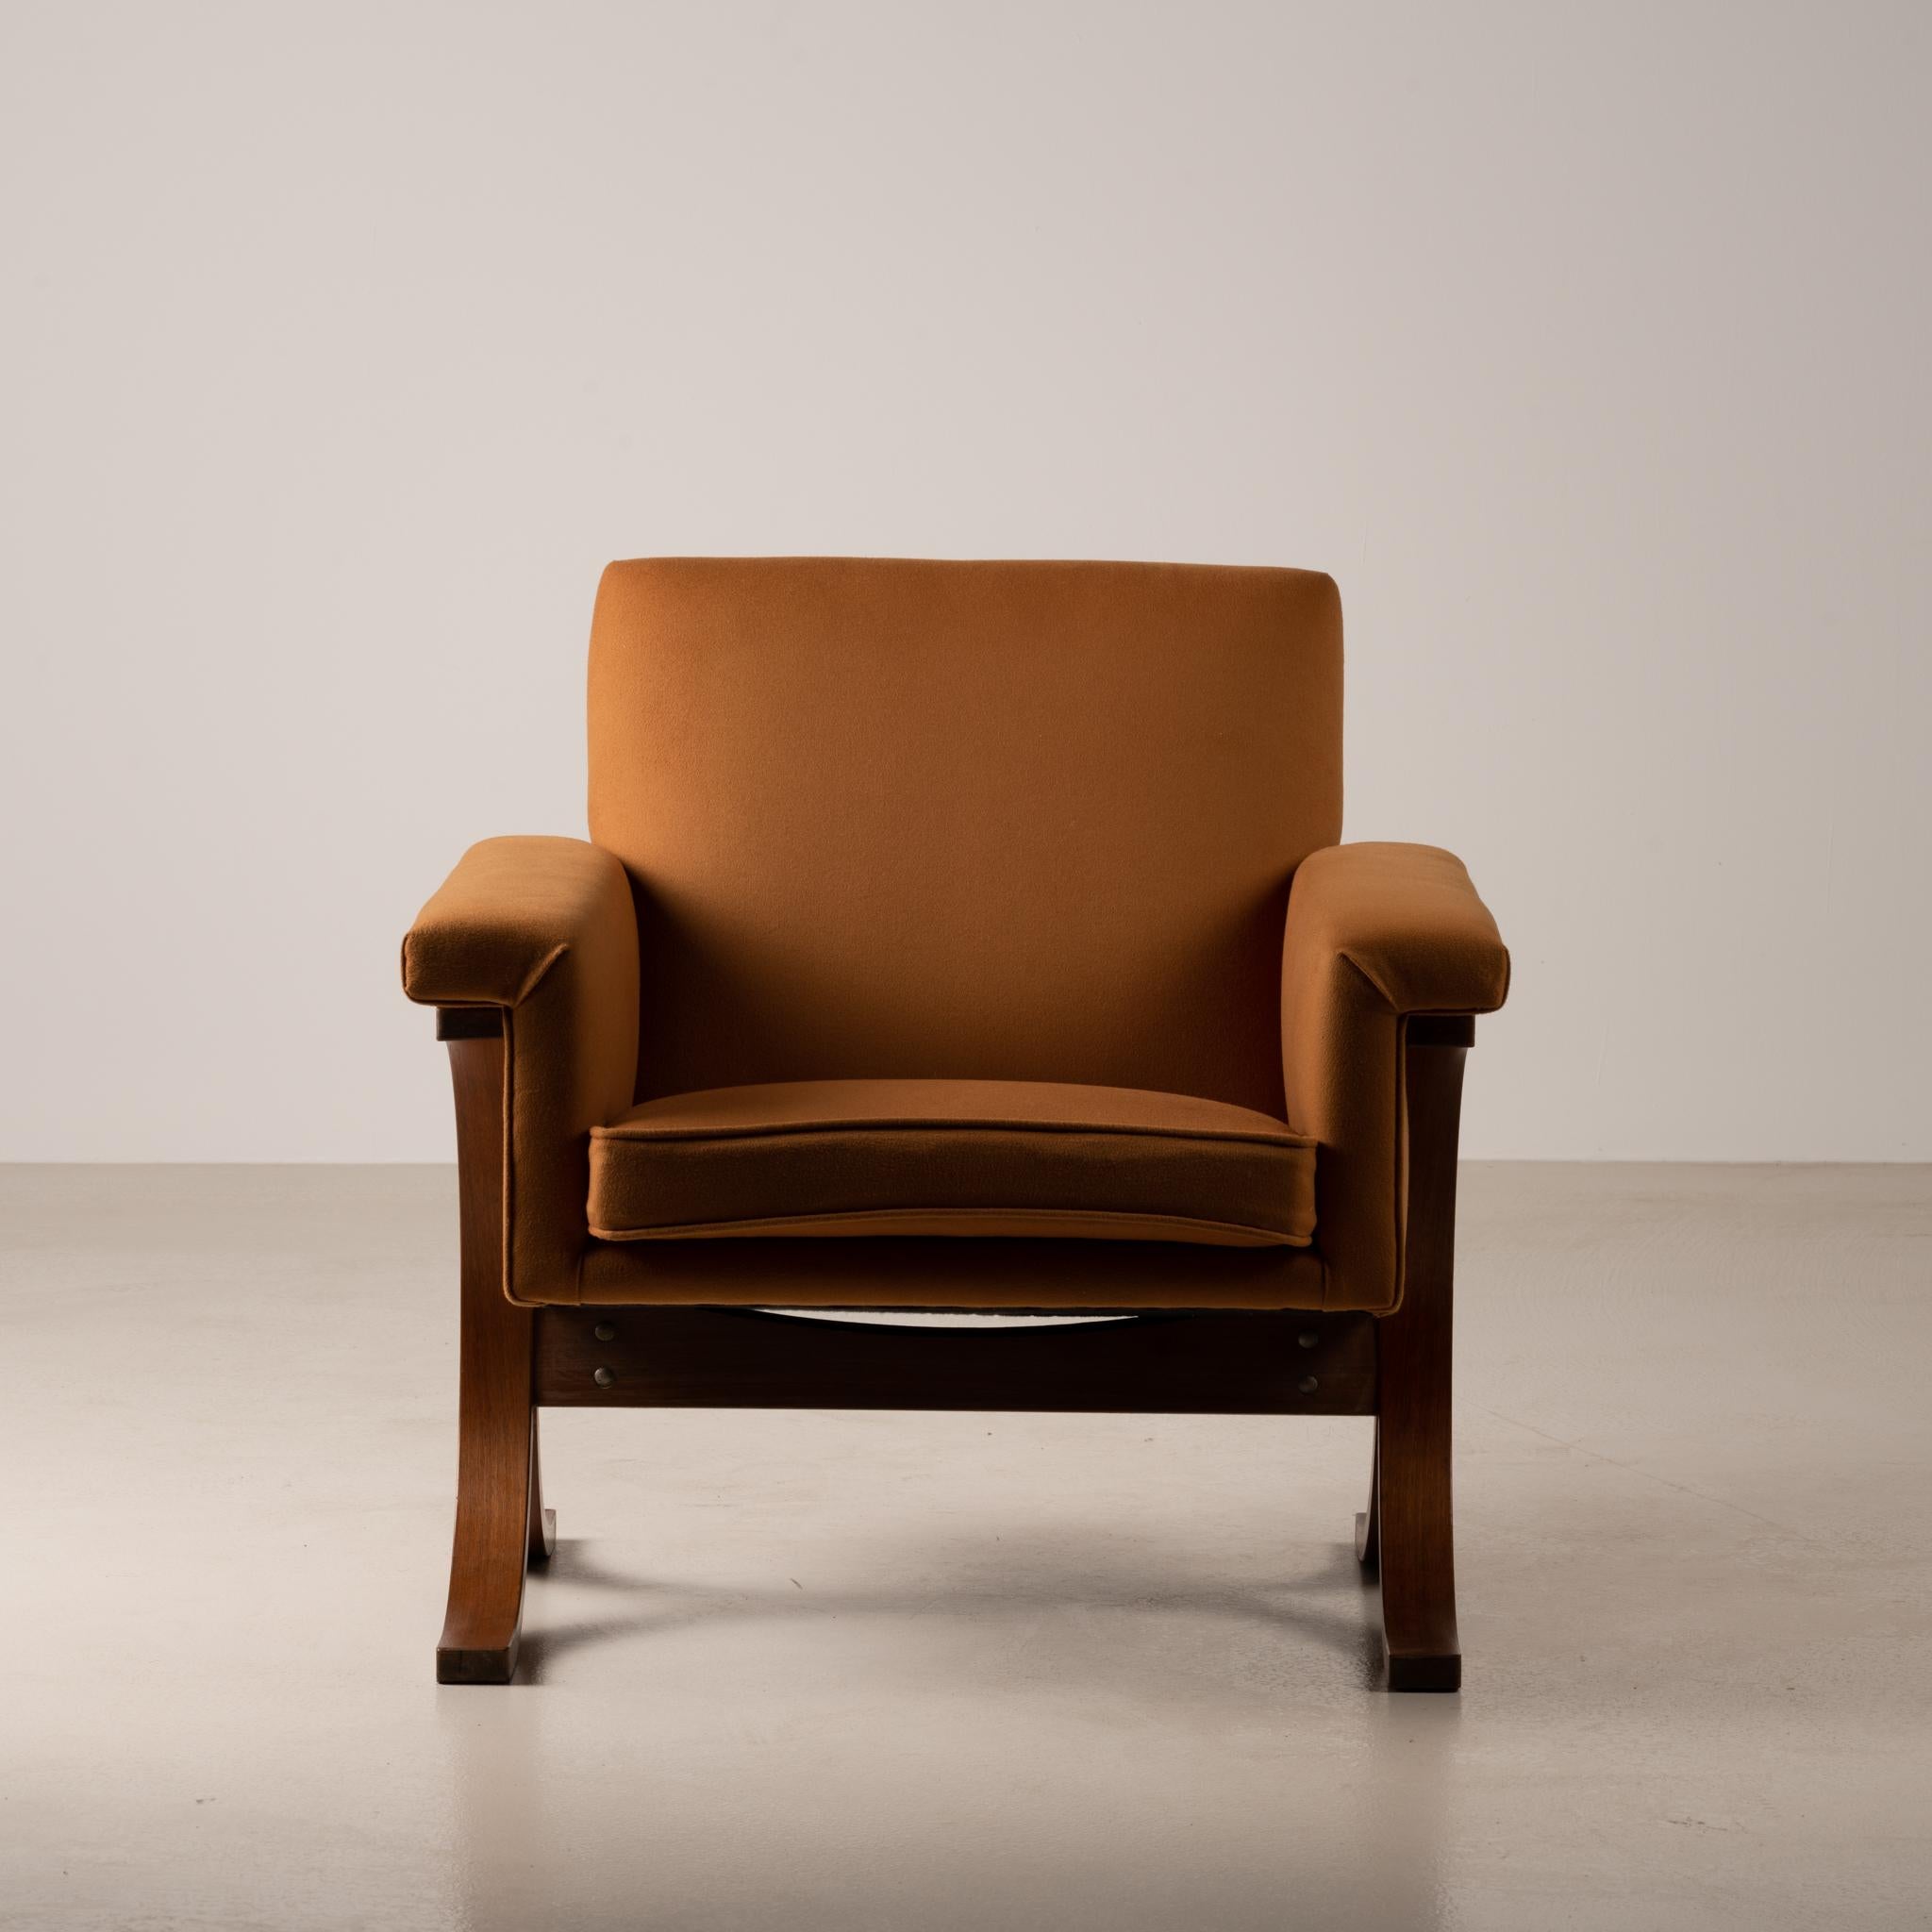 This very unique vintage armchair has been manufactured by Tendo Mokko in the 1960's. It is a very rare item coming from a facilities in Japan, after the relocation of the warehouse, using the molded-plywood technique. Design lovers will appreciate